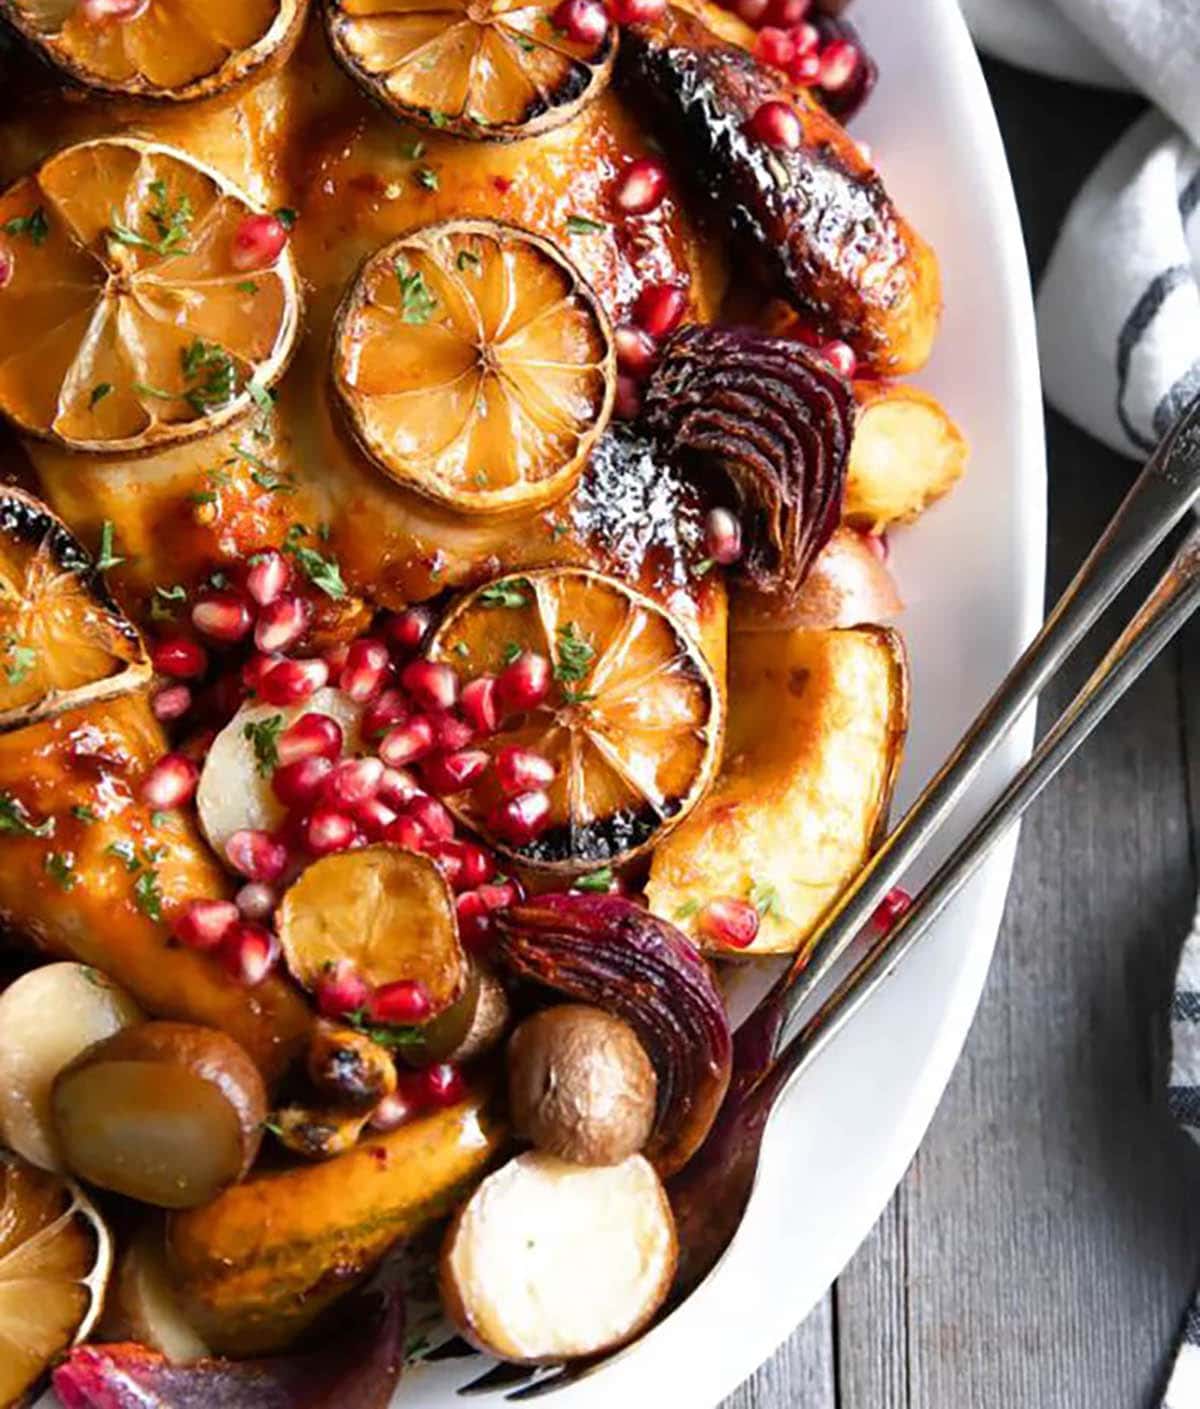 Bakes Harissa Chicken topped with orange slices and pomegranate seeds